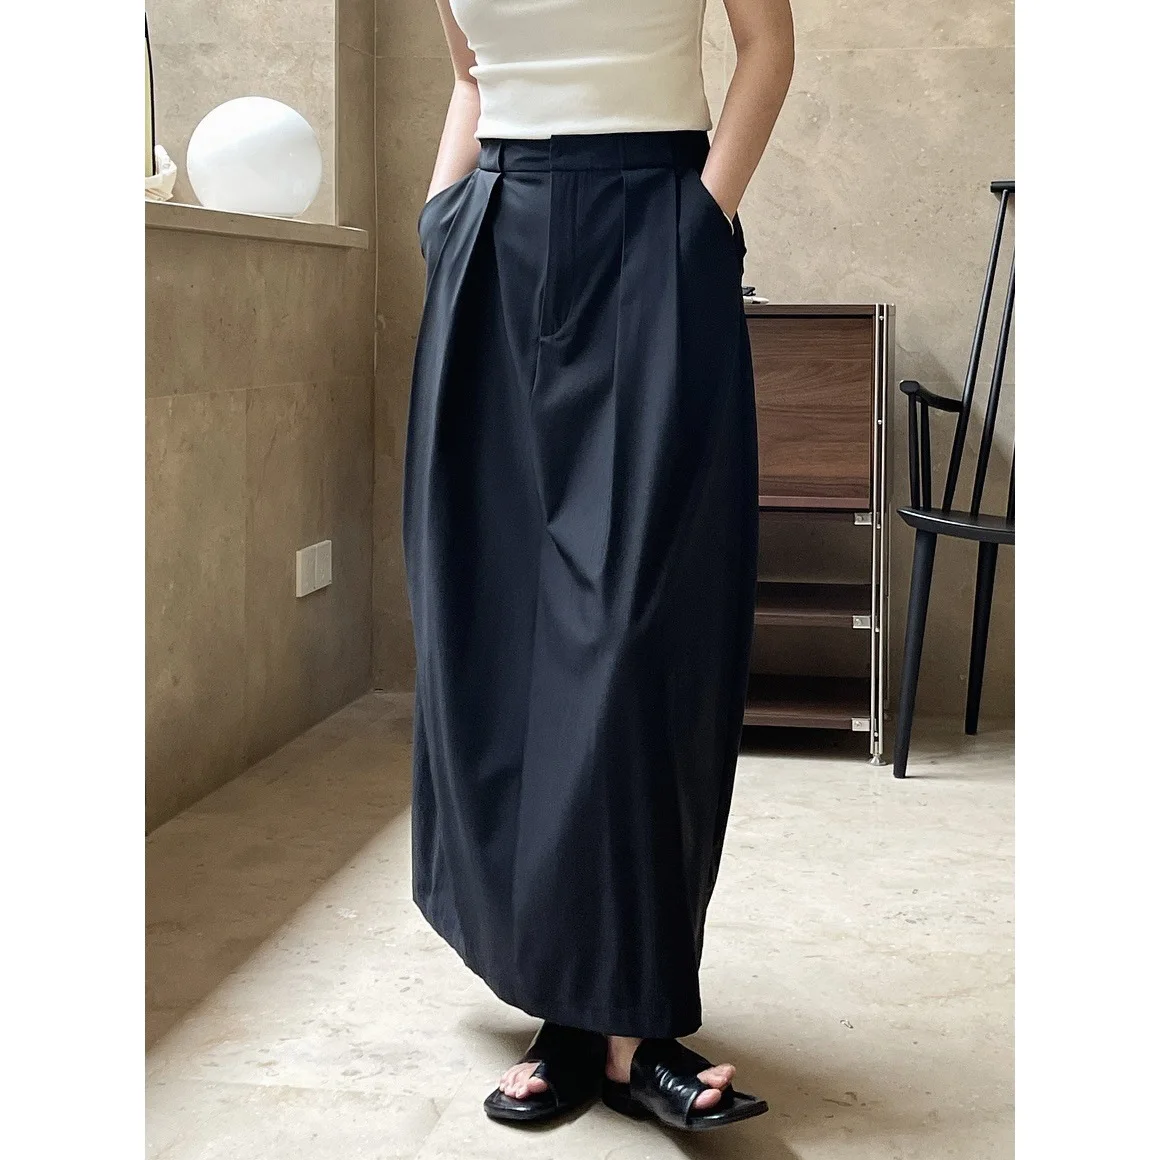 

SuperAen Summer New Simple Commuter Black Loose Silhouette Casual Long Skirt for Women